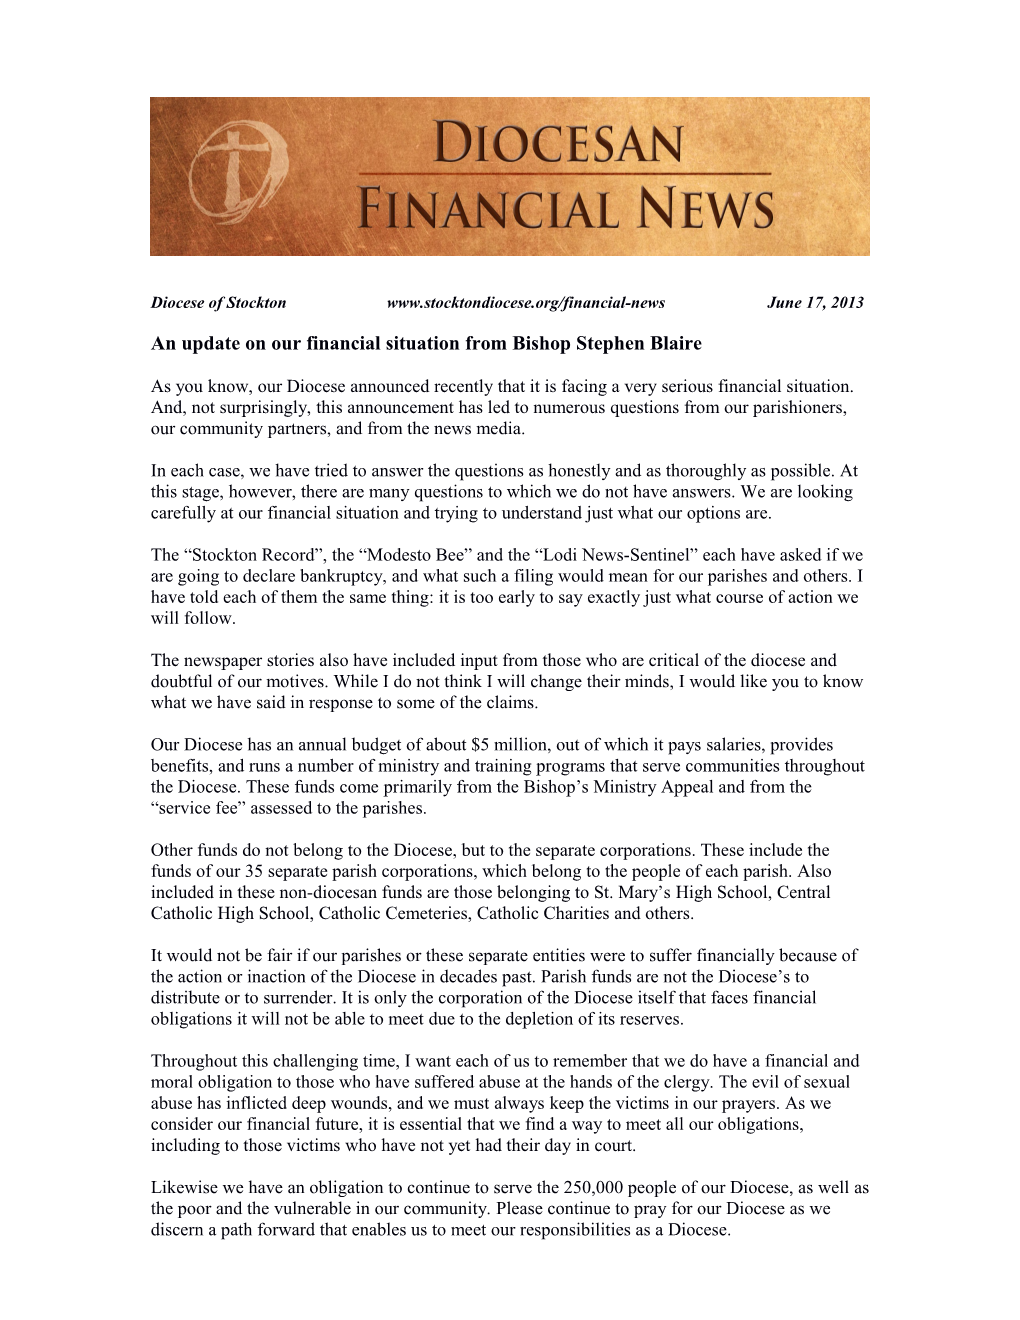 An Update on Our Financial Situation from Bishop Stephen Blaire